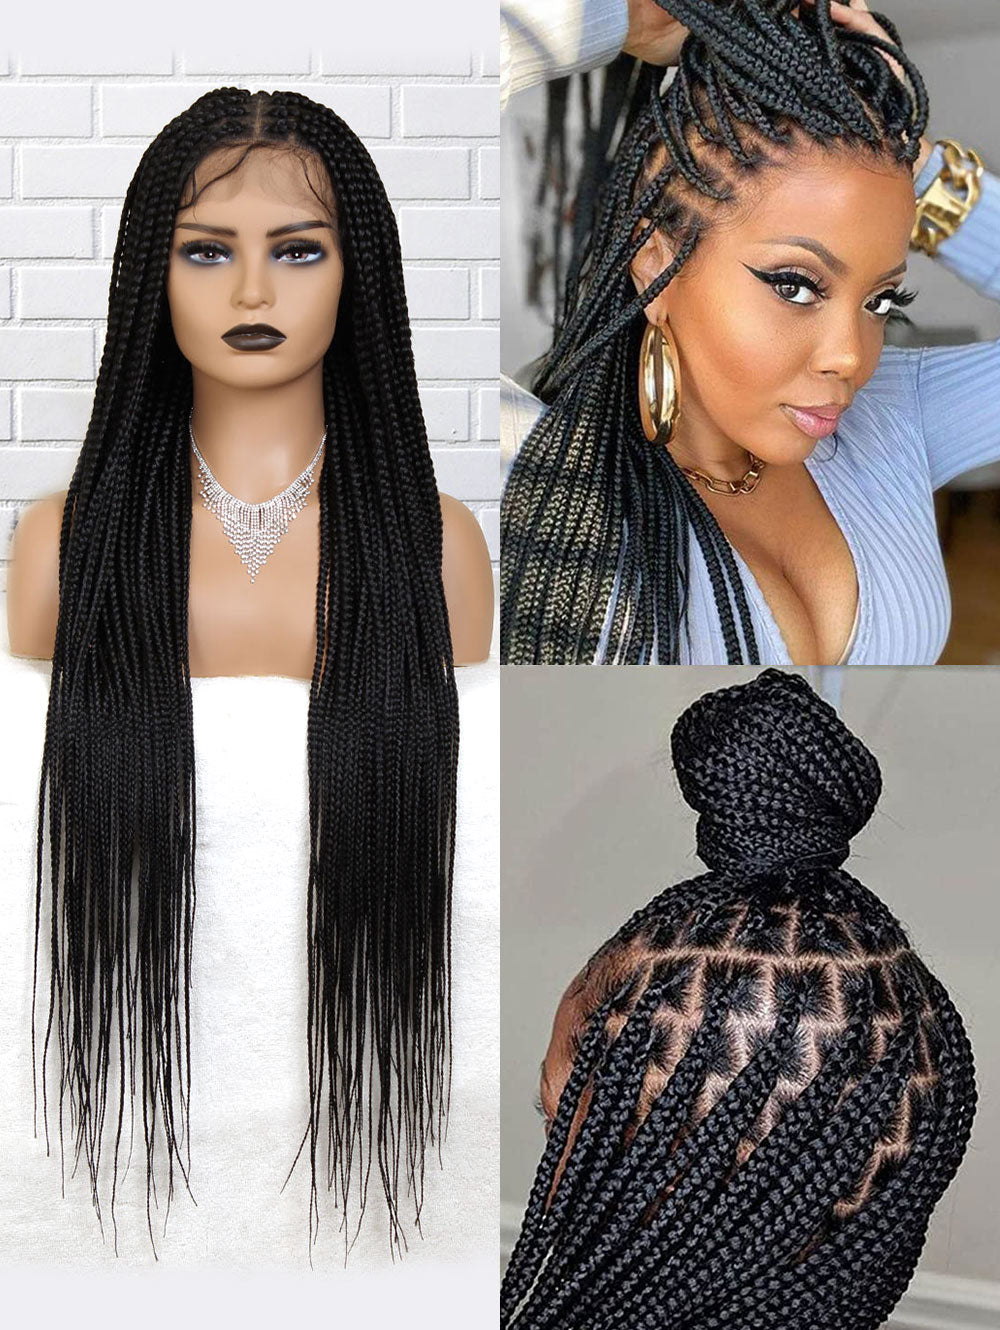 36" Square Based Full Lace Box Braided Wigs, Knotless Cornrow Braids Wig